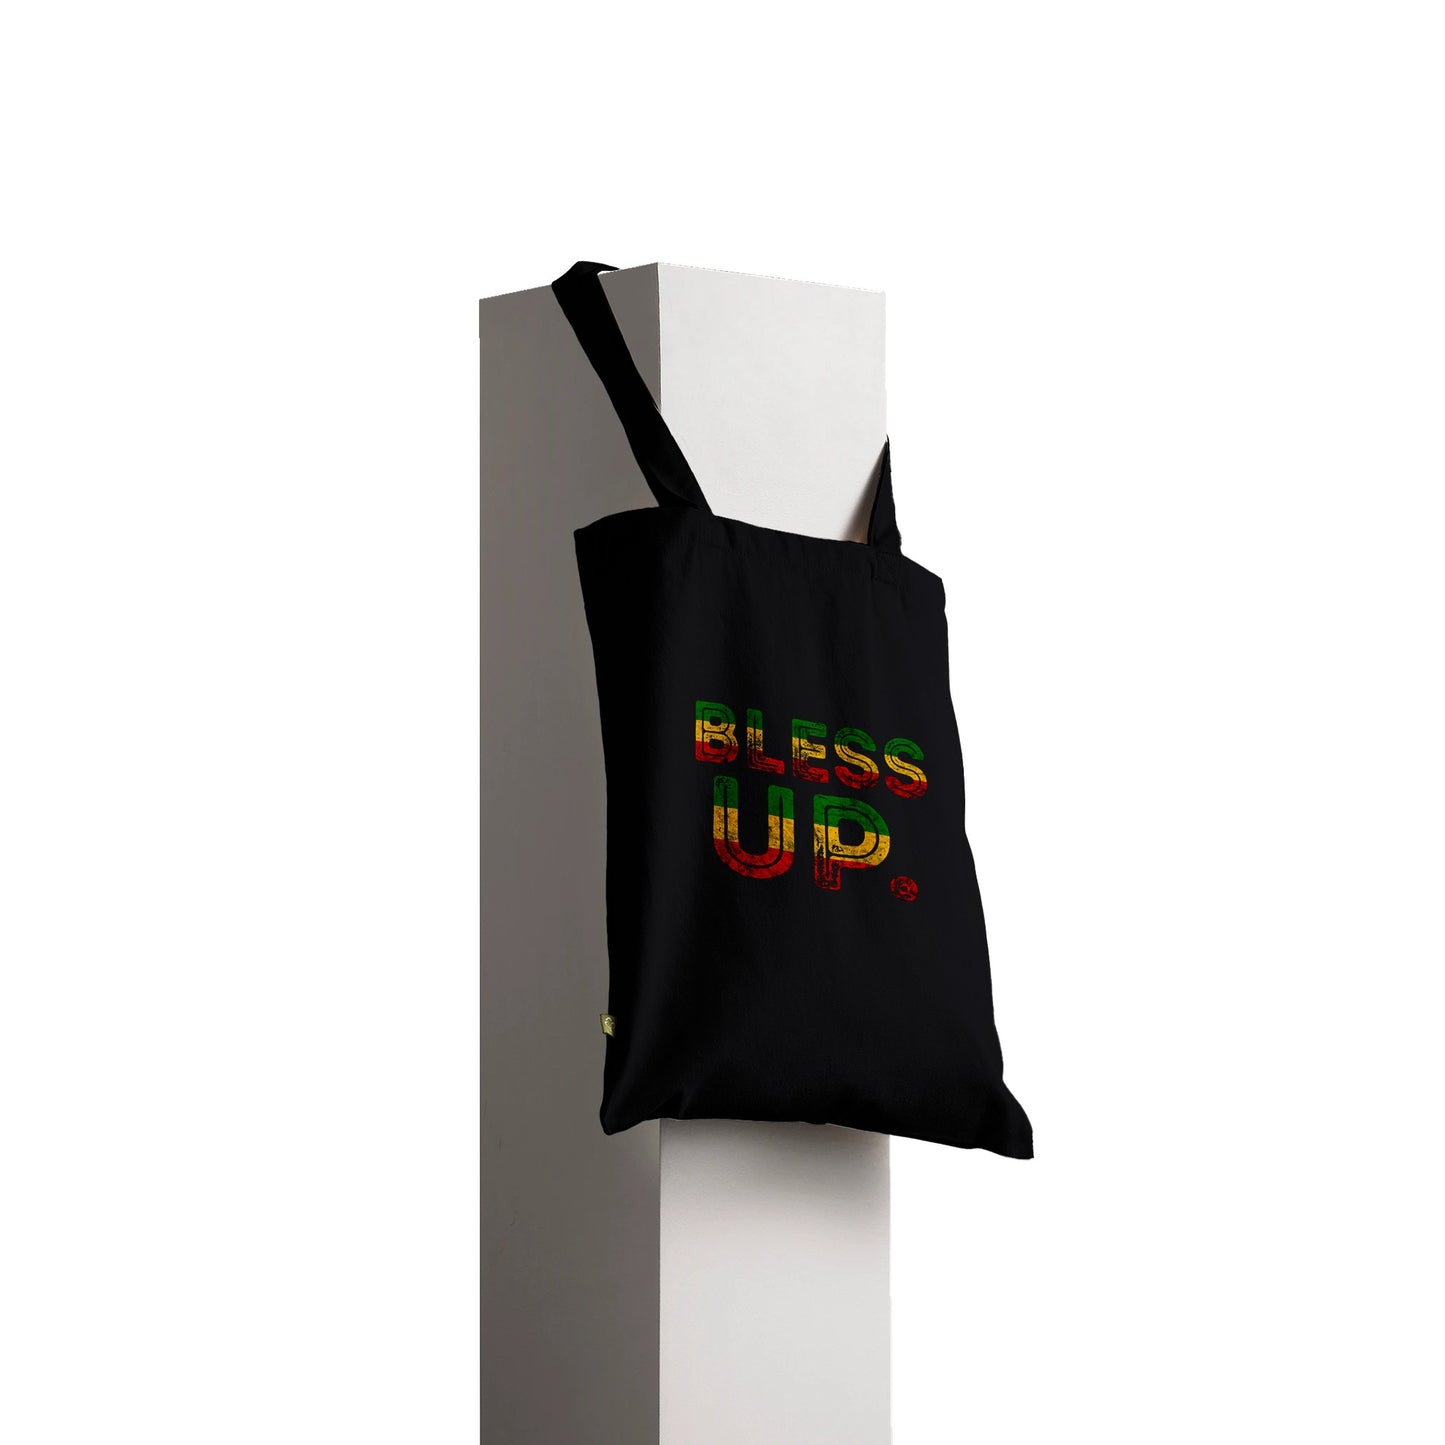 Bless Up Tote Bag